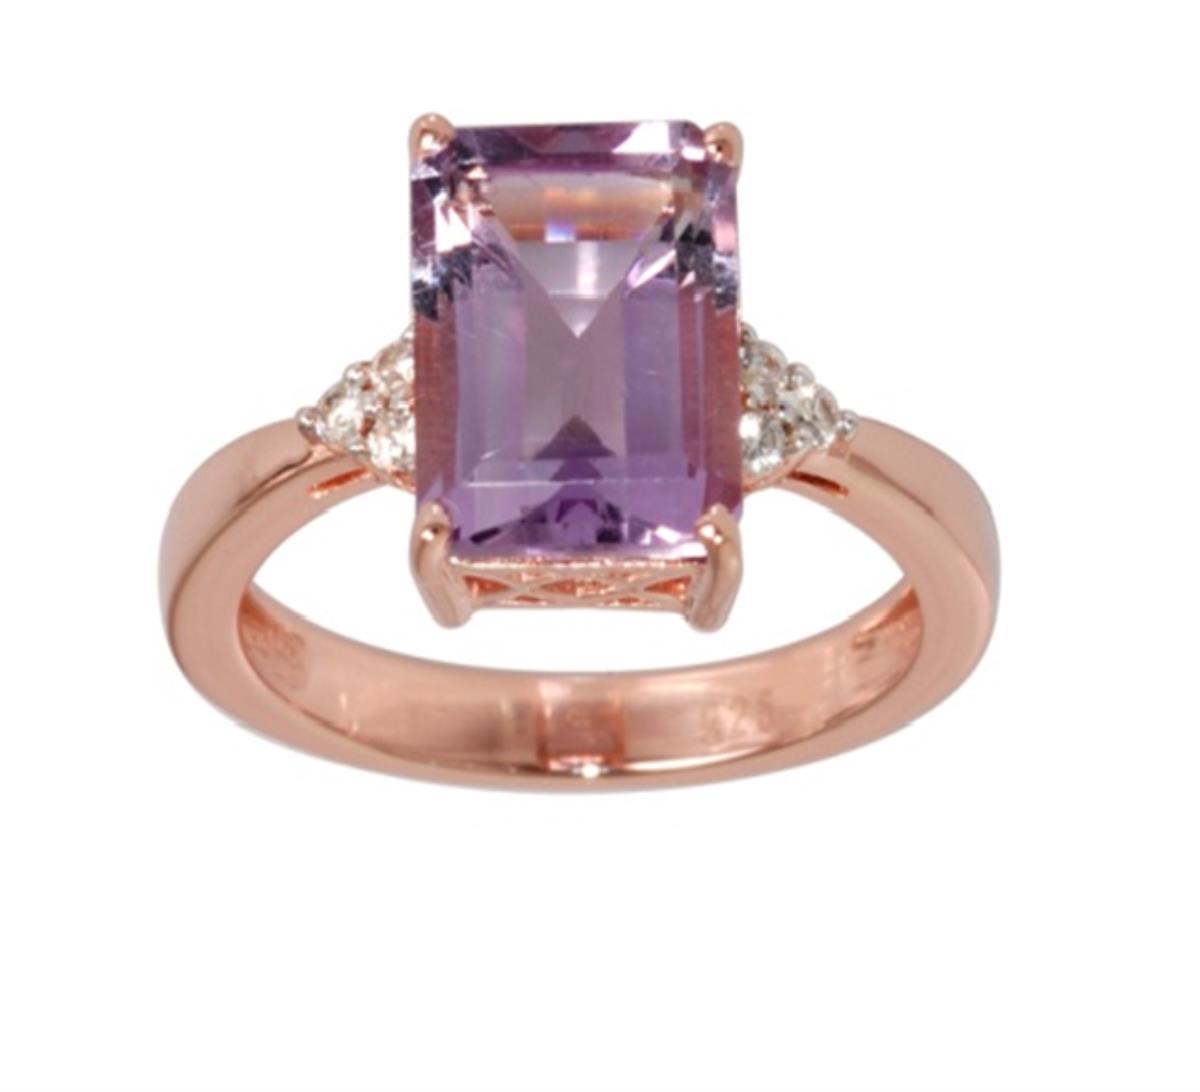 10K Rose Gold 10x8mm Emerald Cut Pink Amethyst with White Zircon Sides Engagement Ring